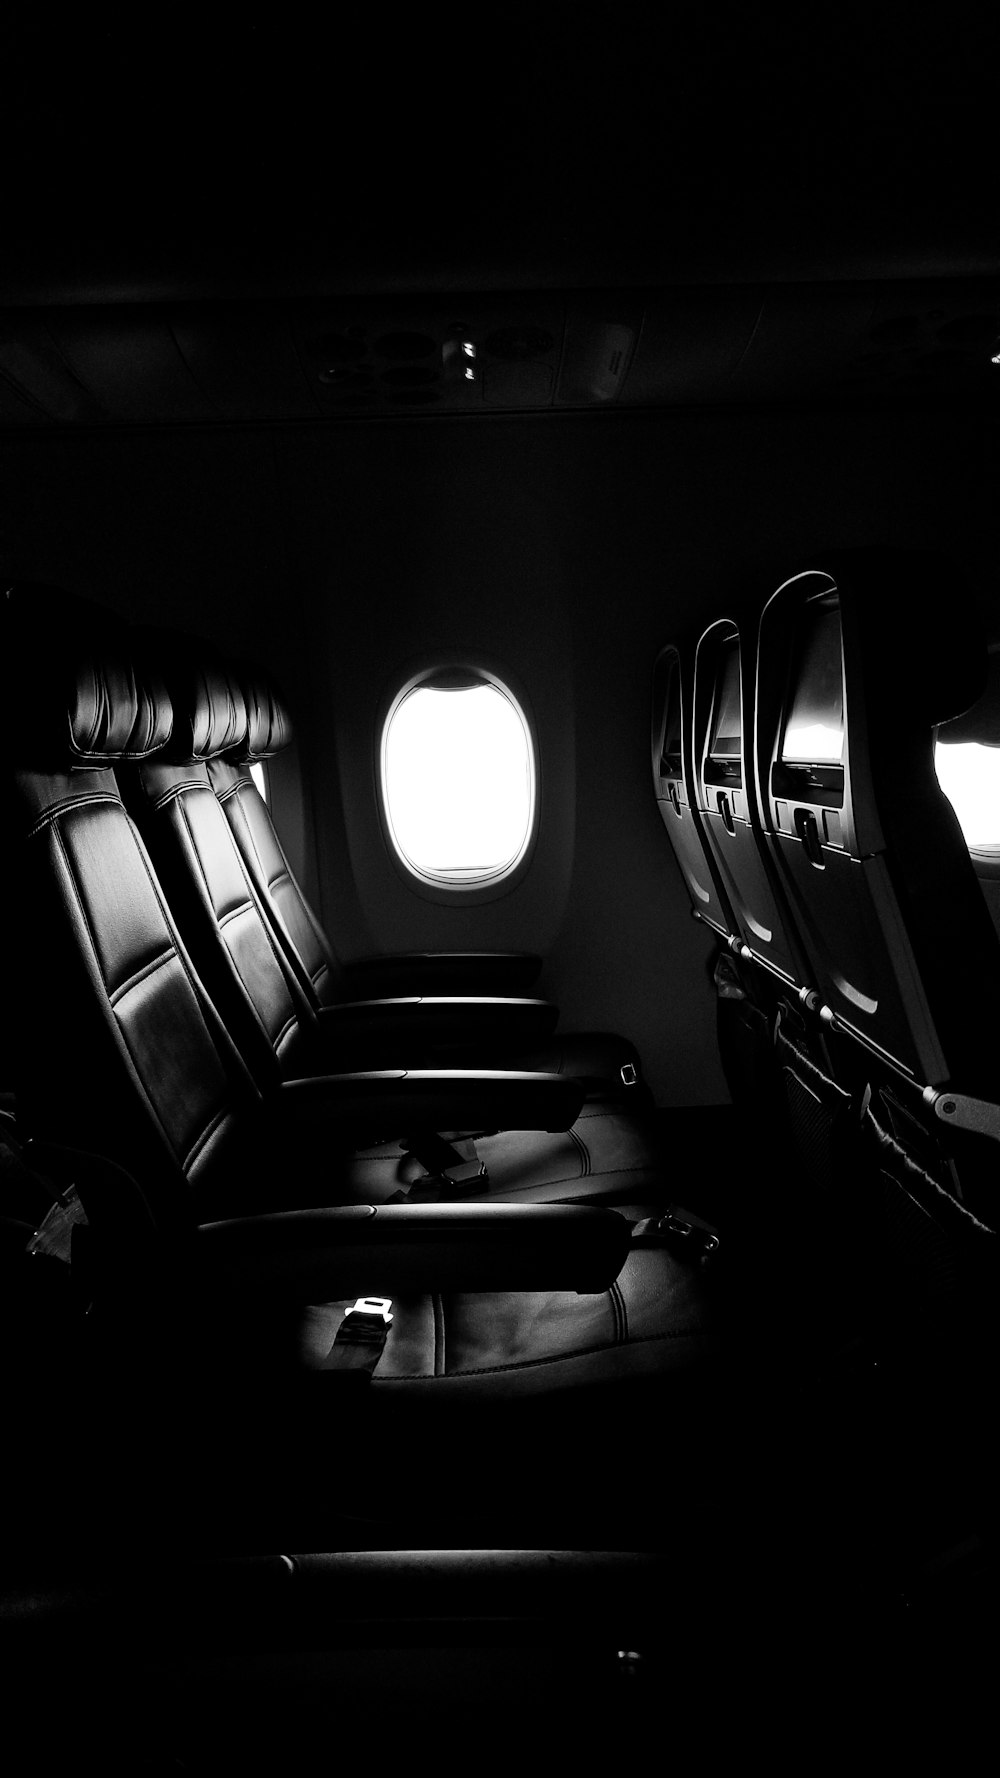 empty chairs of airplane